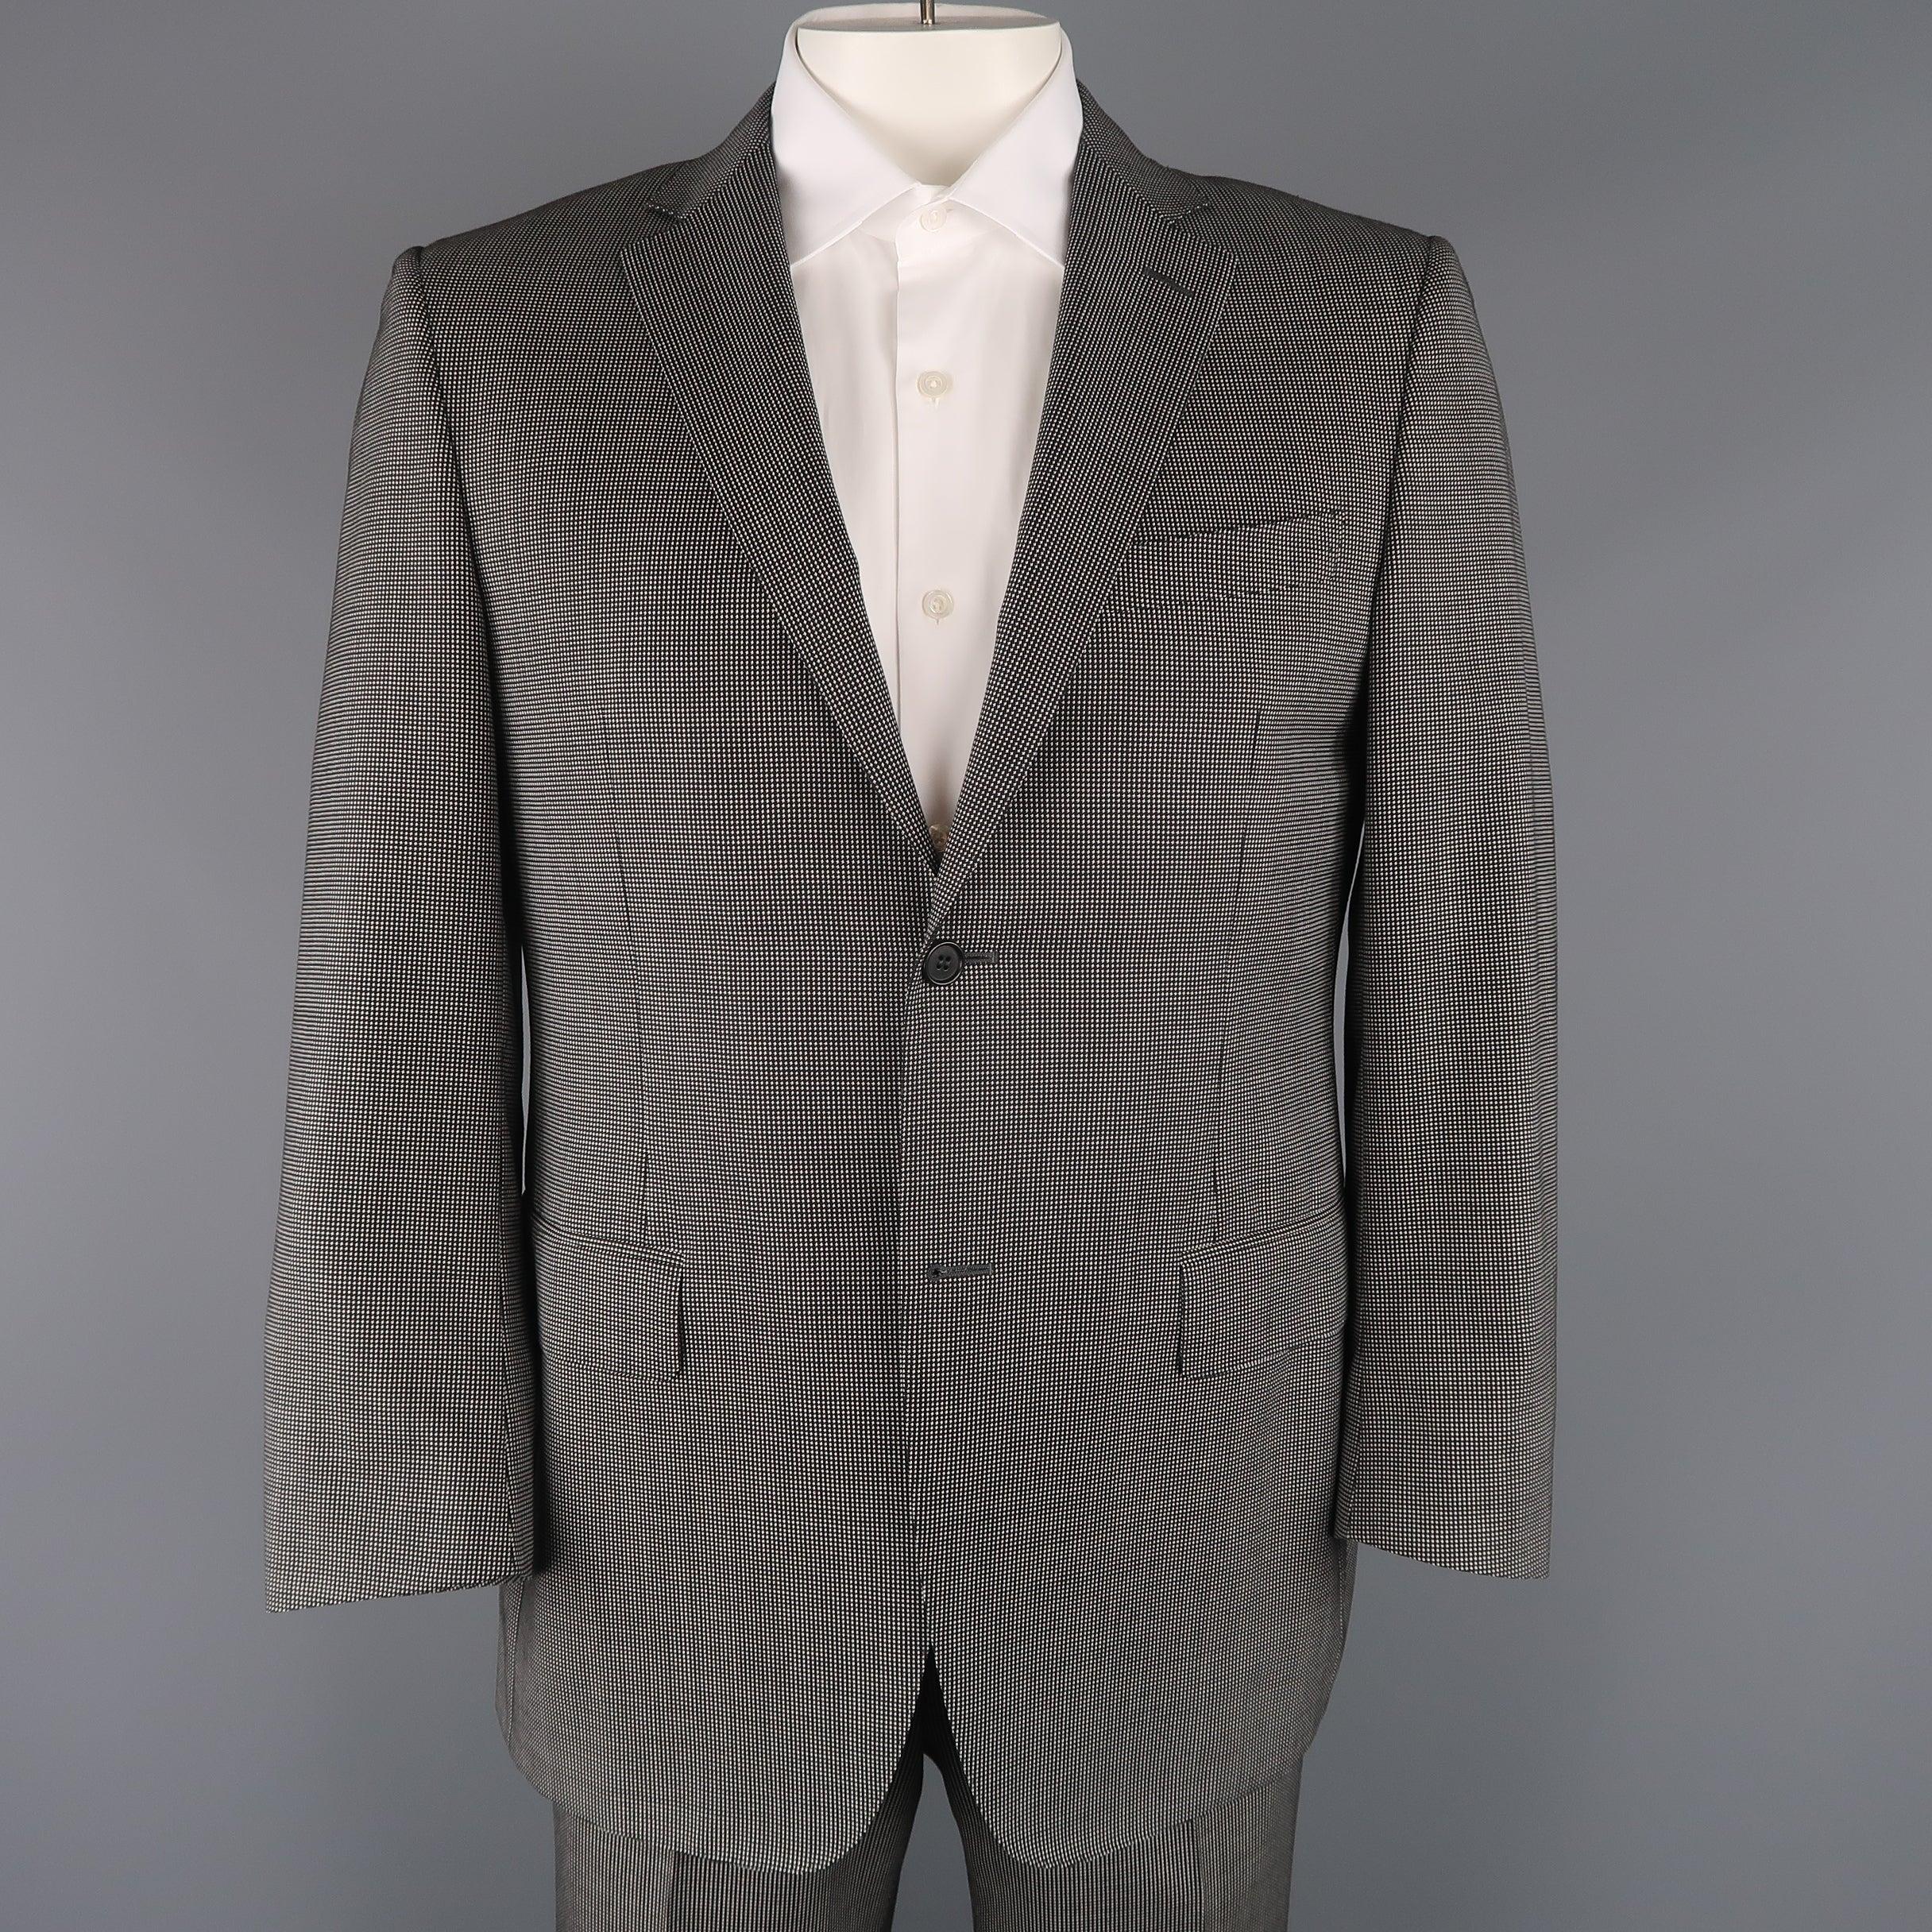 Two piece CANALI suit come sin black and white Nailhead pattern wool and includes a single breasted, two button sport coat with notch lapel, and matching flat front trousers. Made in Italy.Excellent Pre-Owned Condition. 

Marked:   IT 52